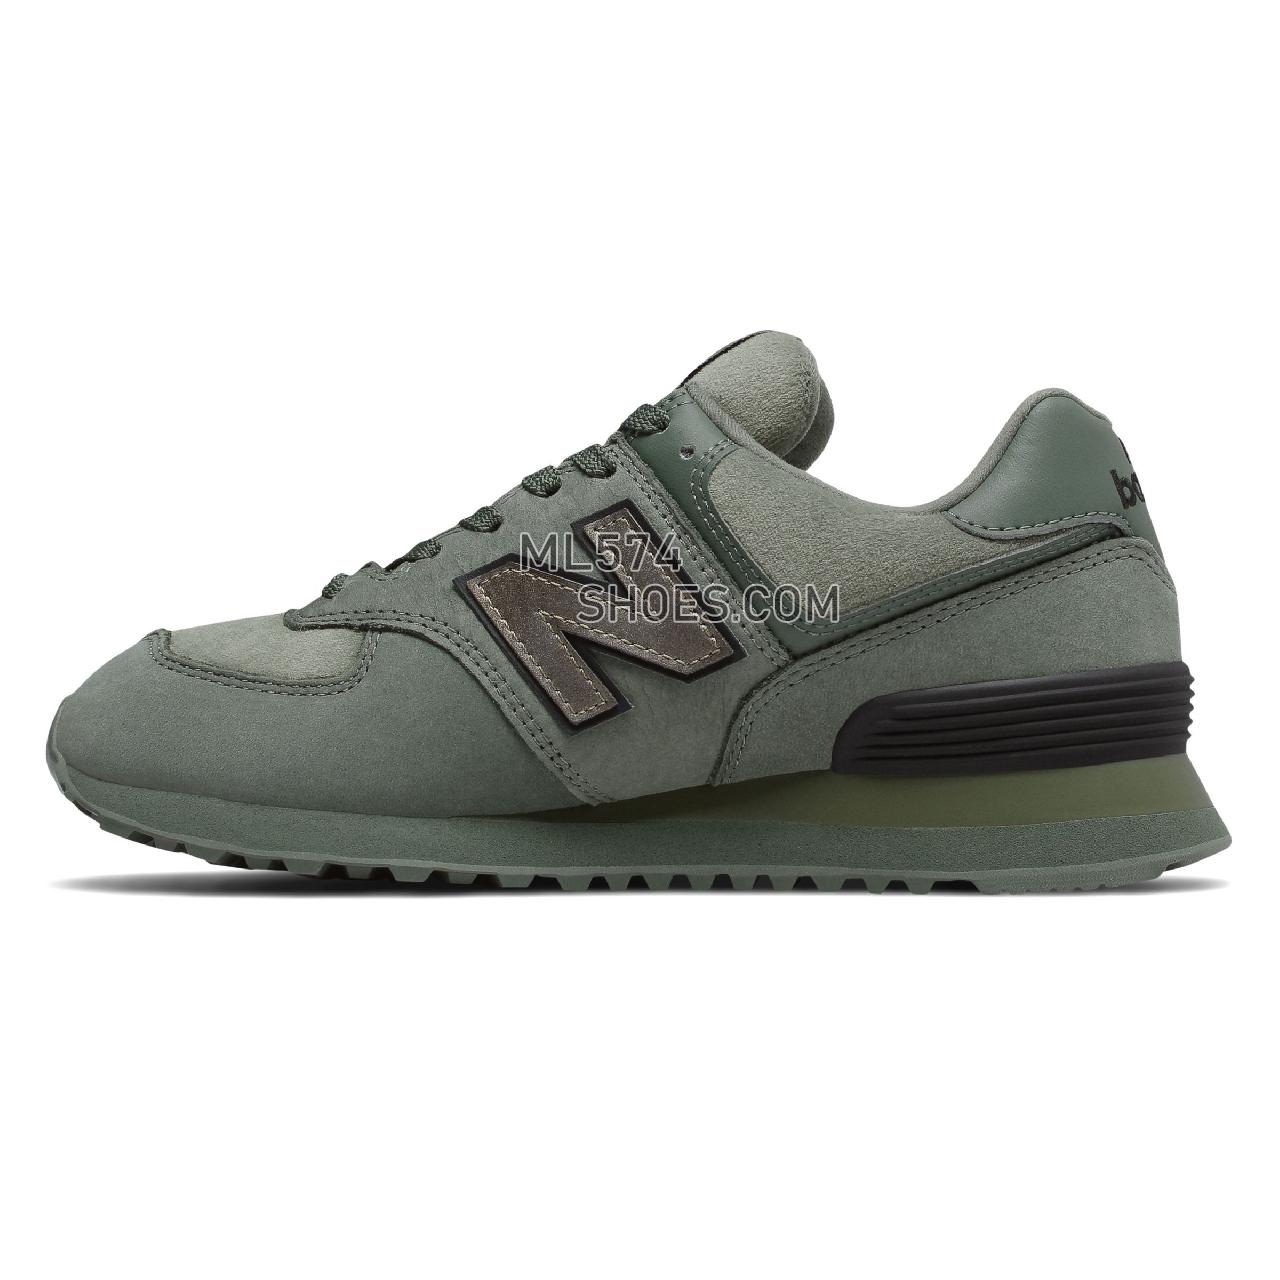 New Balance 574 - Women's Classic Sneakers - Slate Green with Black - WL574LDH